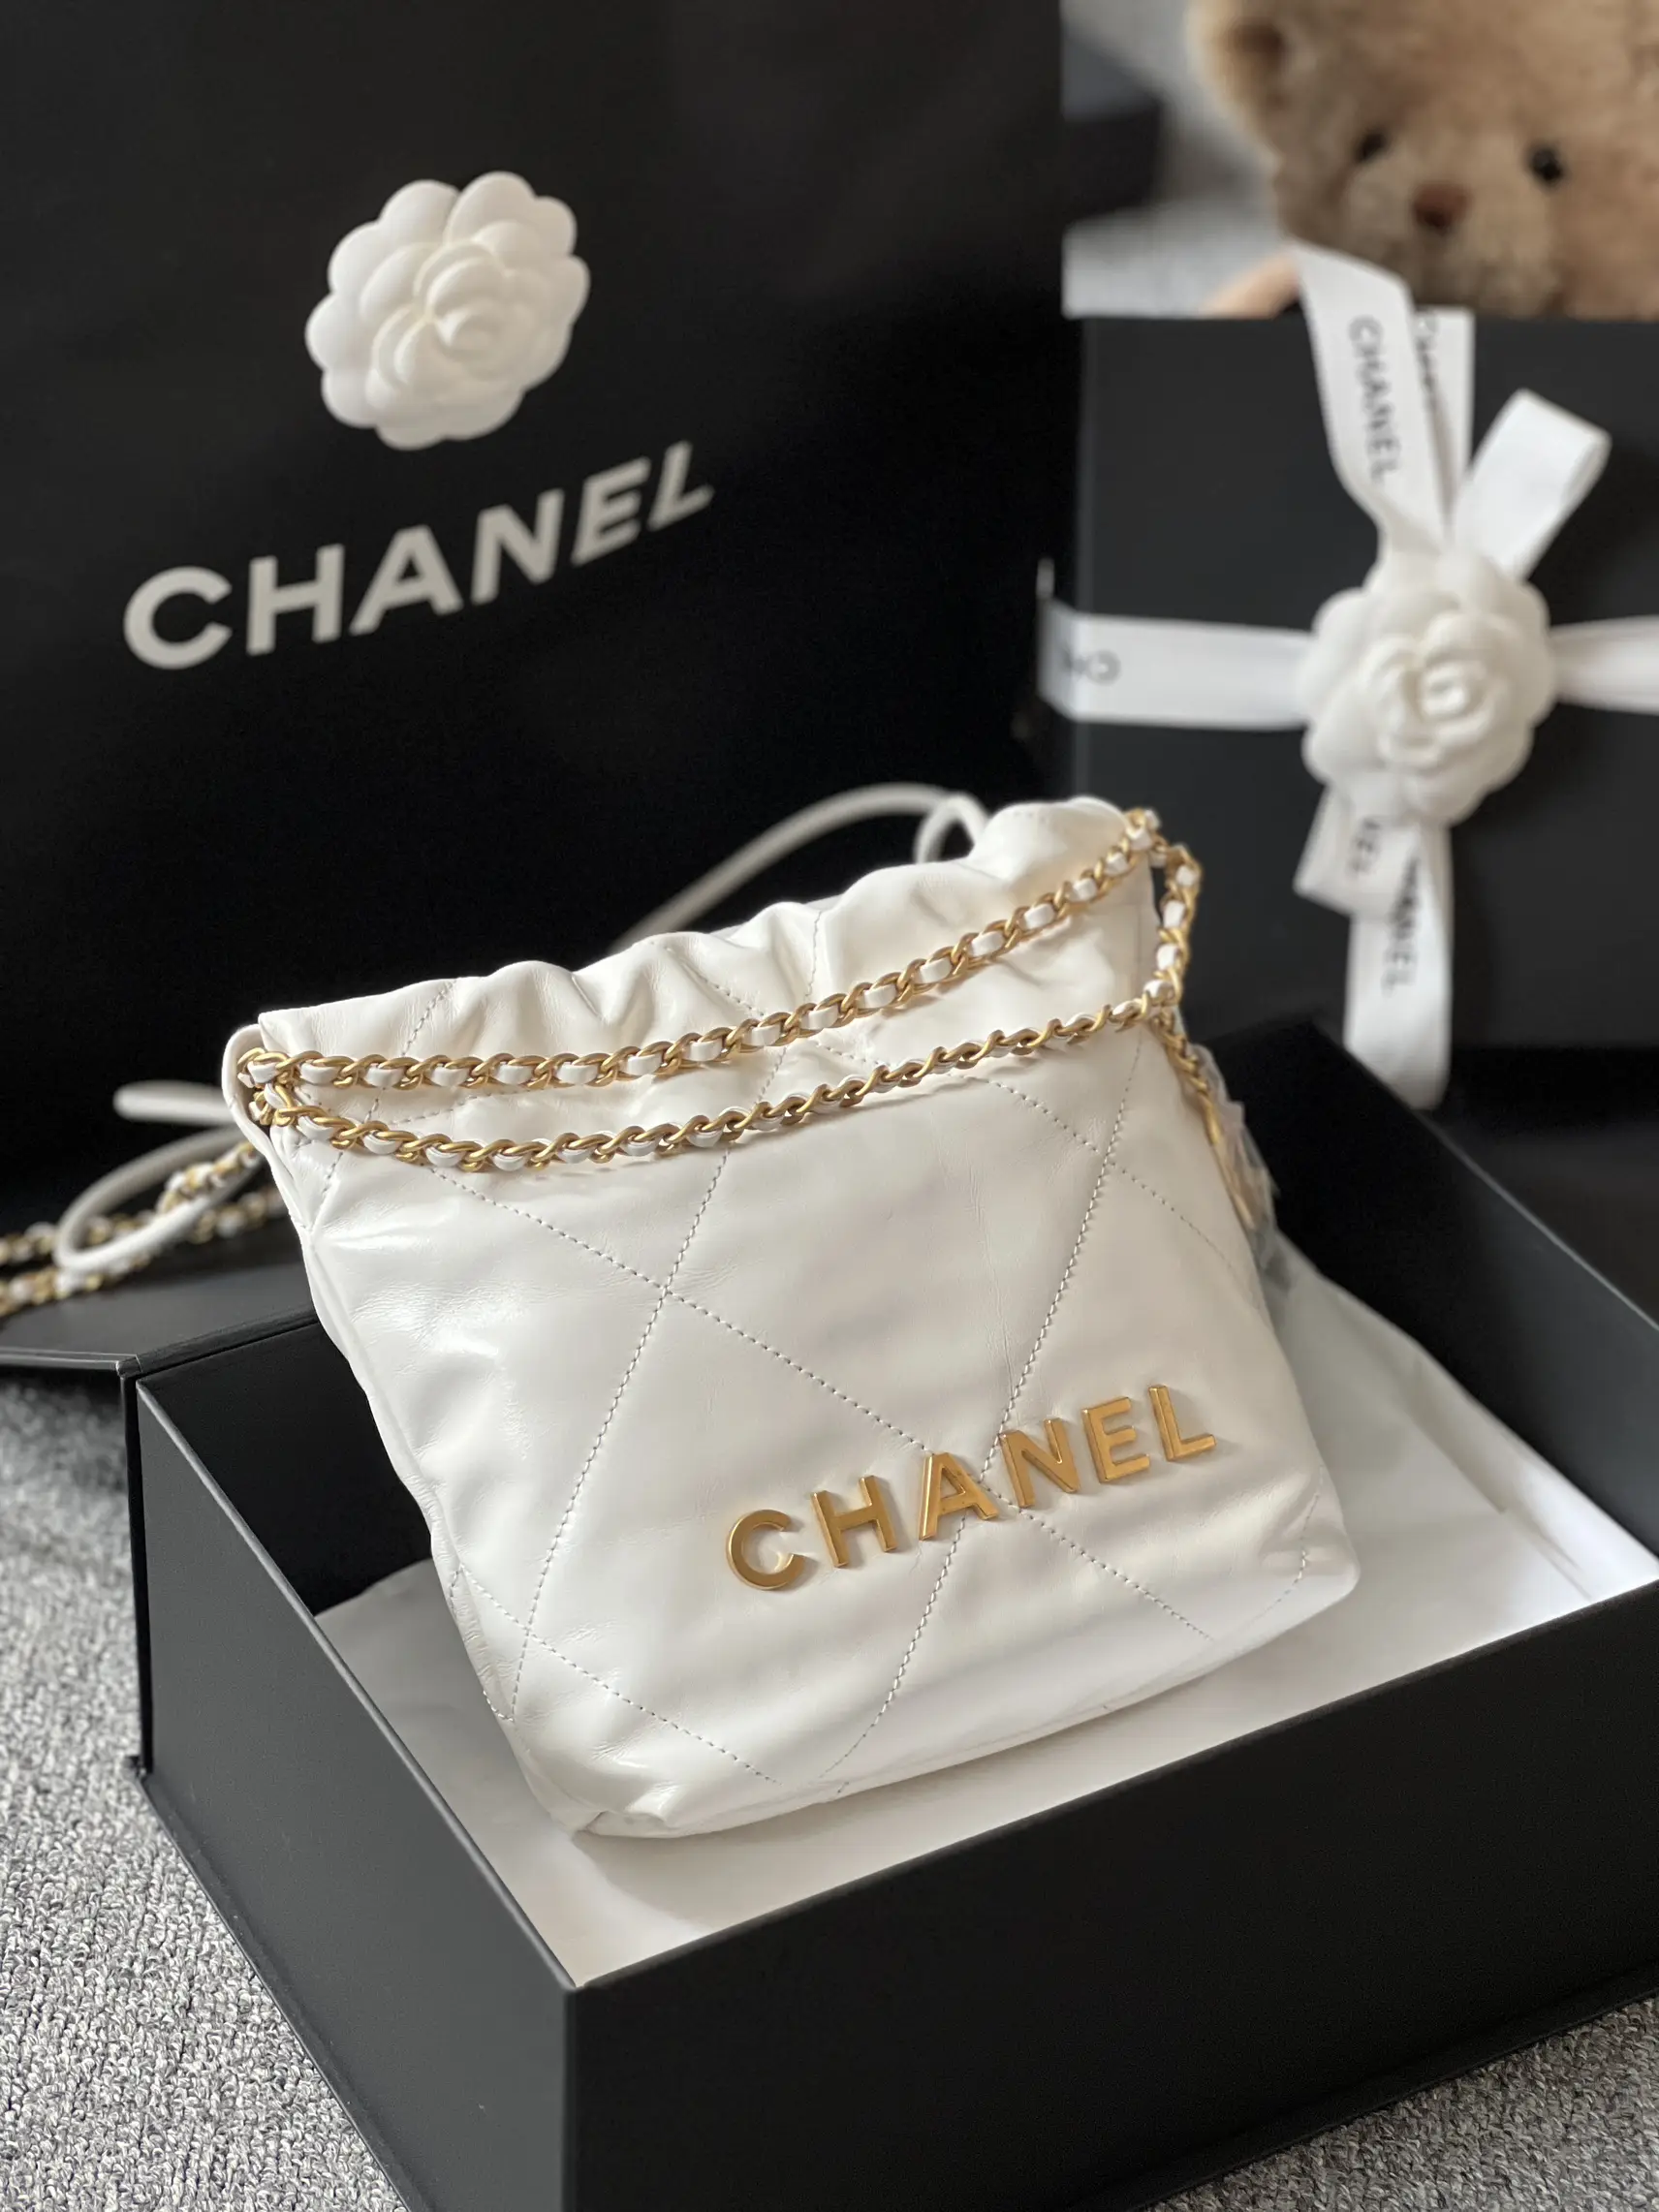 CHANEL 22 MINI HANDBAG REVIEW  Gallery posted by Avianna Astrid